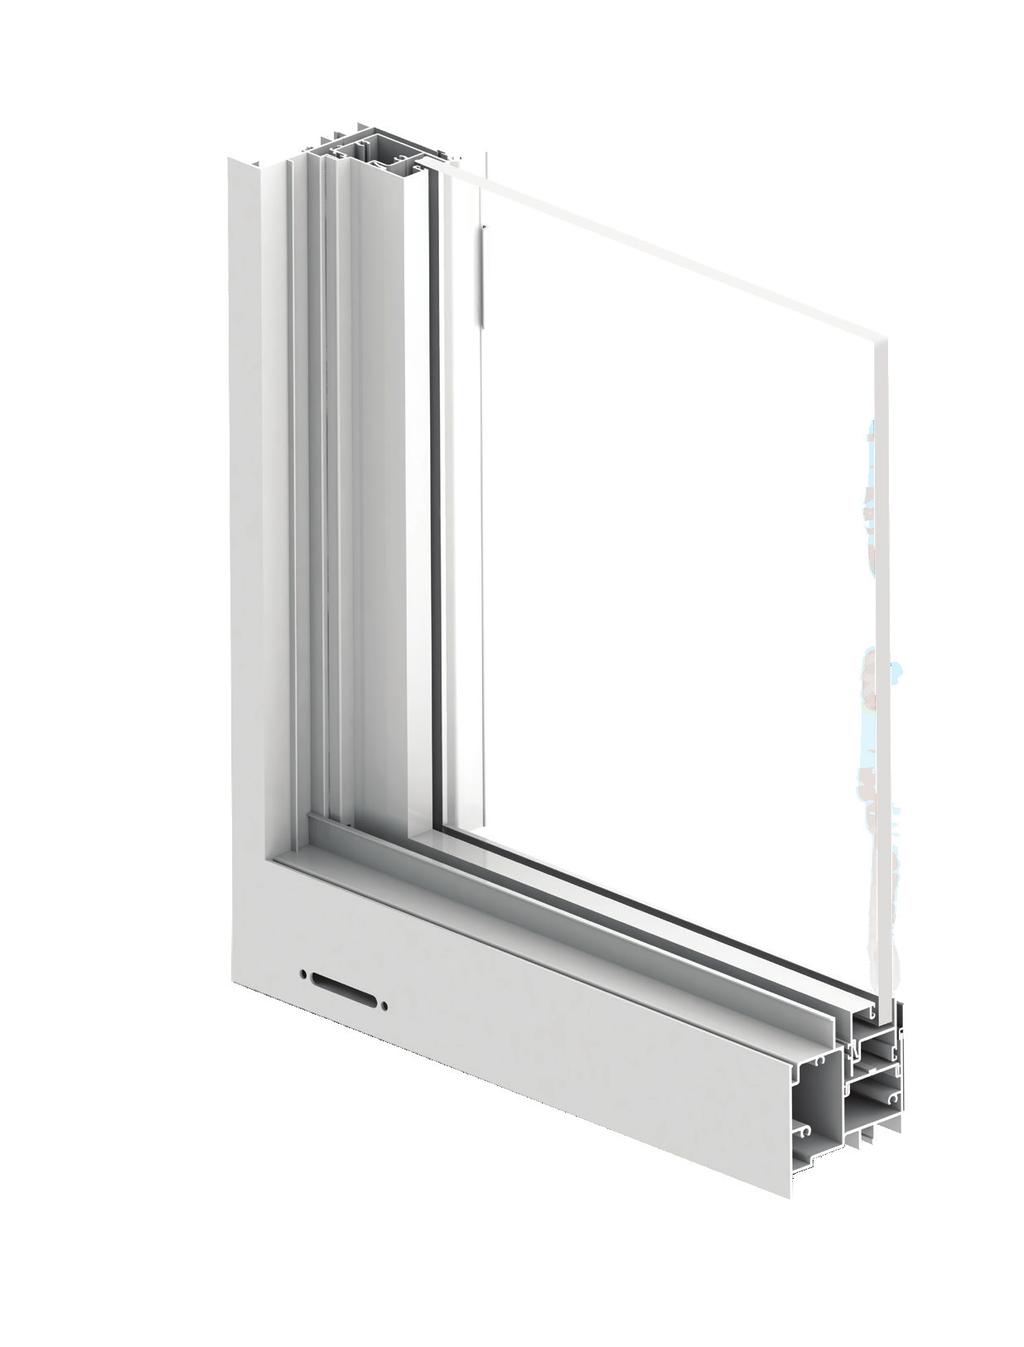 EL-200 The EL-200 is a horizontal sliding window. This product is designed to ensure smooth, easy operation to allow maximum ventilation. EL-200 can be used for a wide variety of applications.